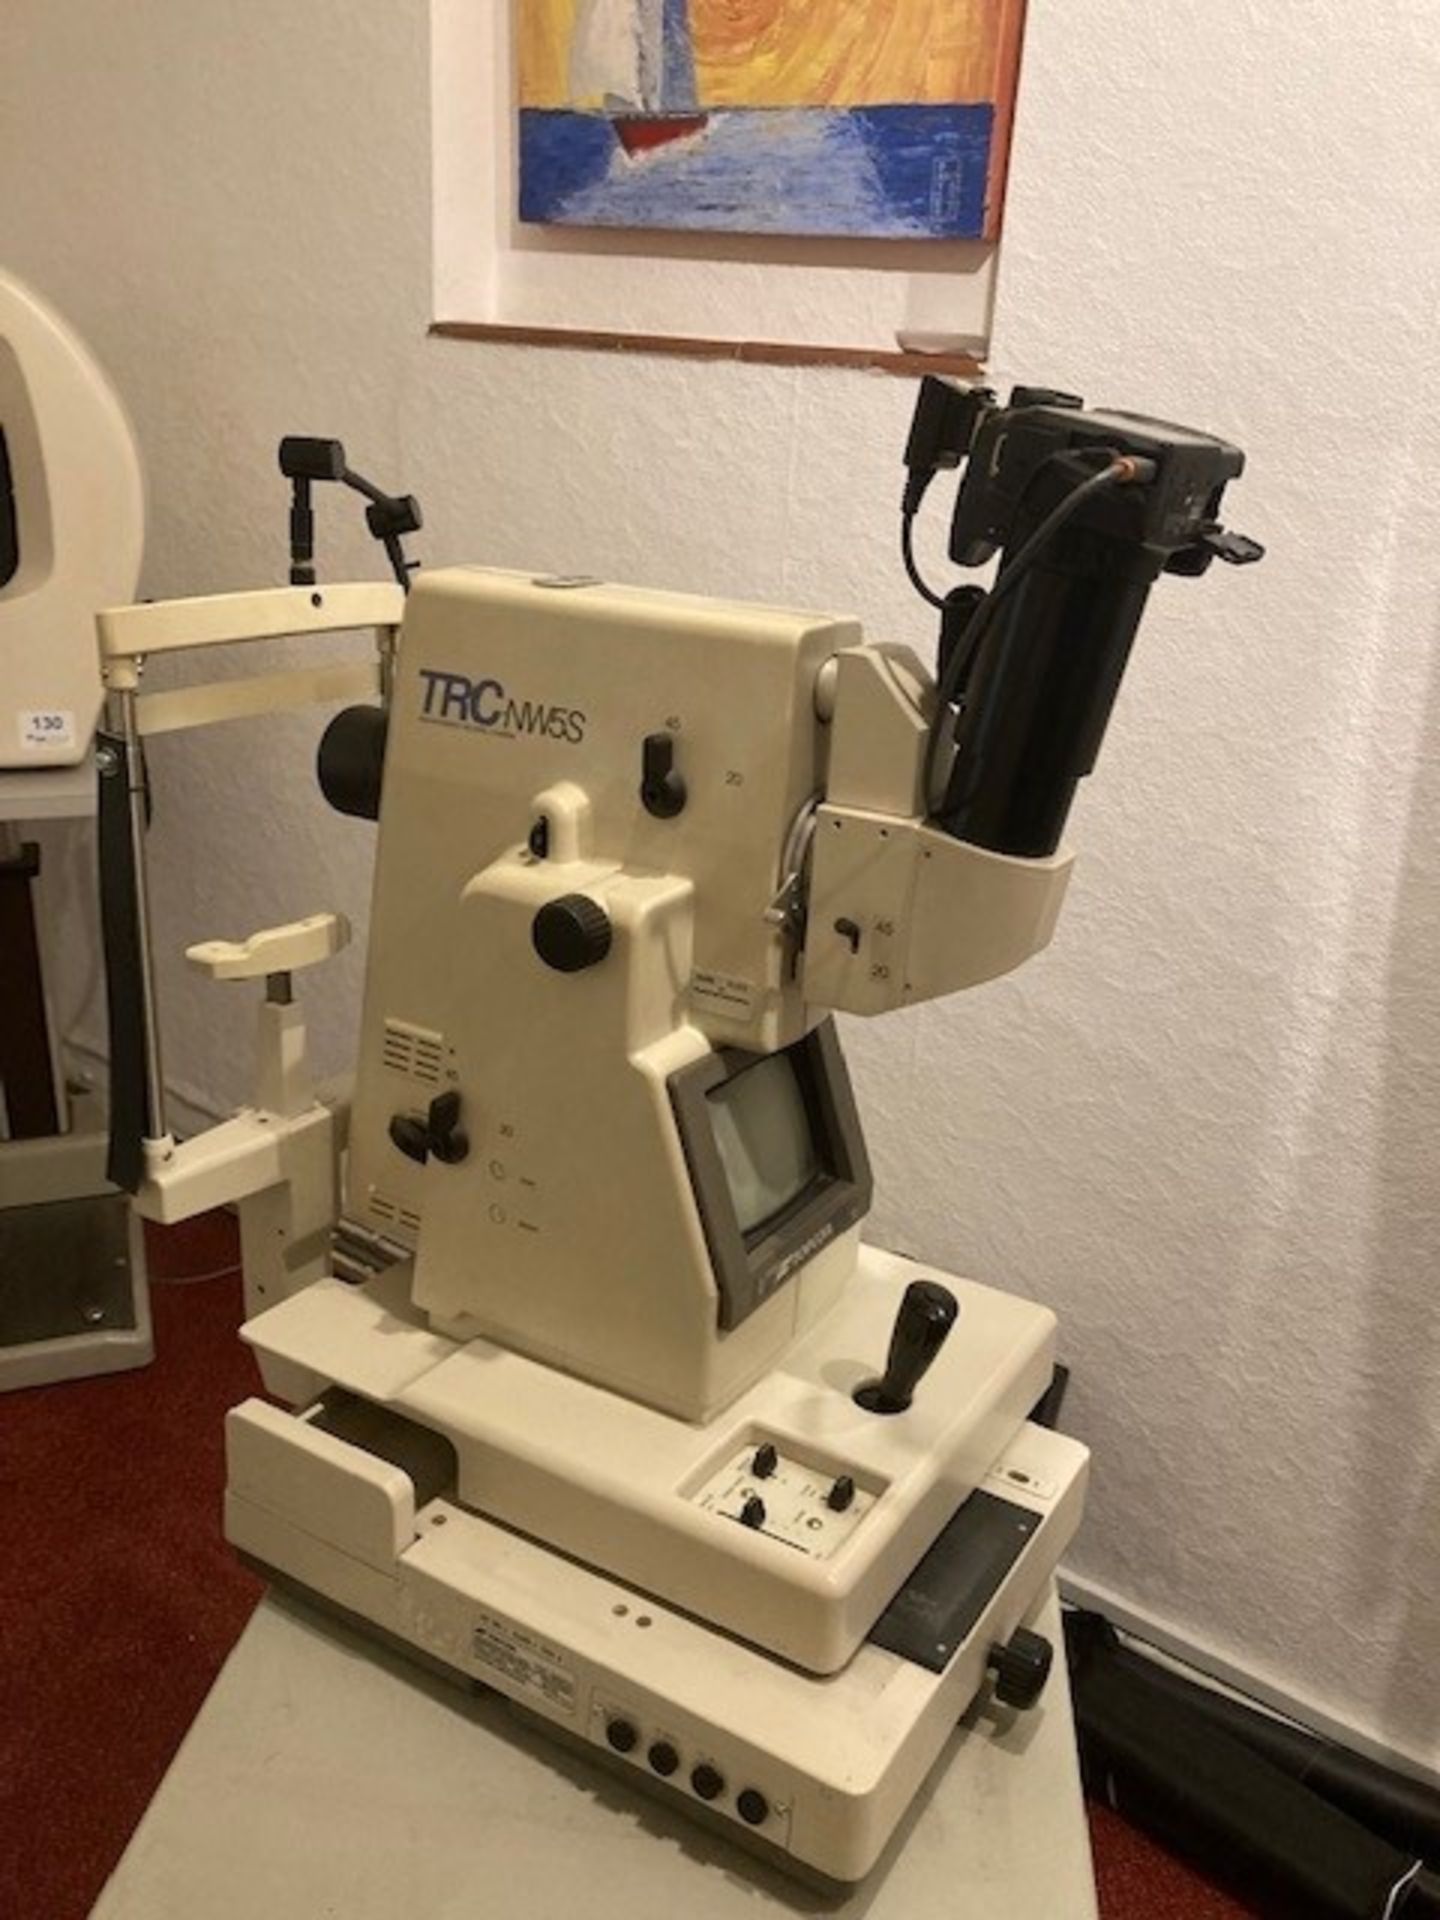 Topcon TRC-NW5S non mydriatic retinal camera with height adjustable table - Image 2 of 8